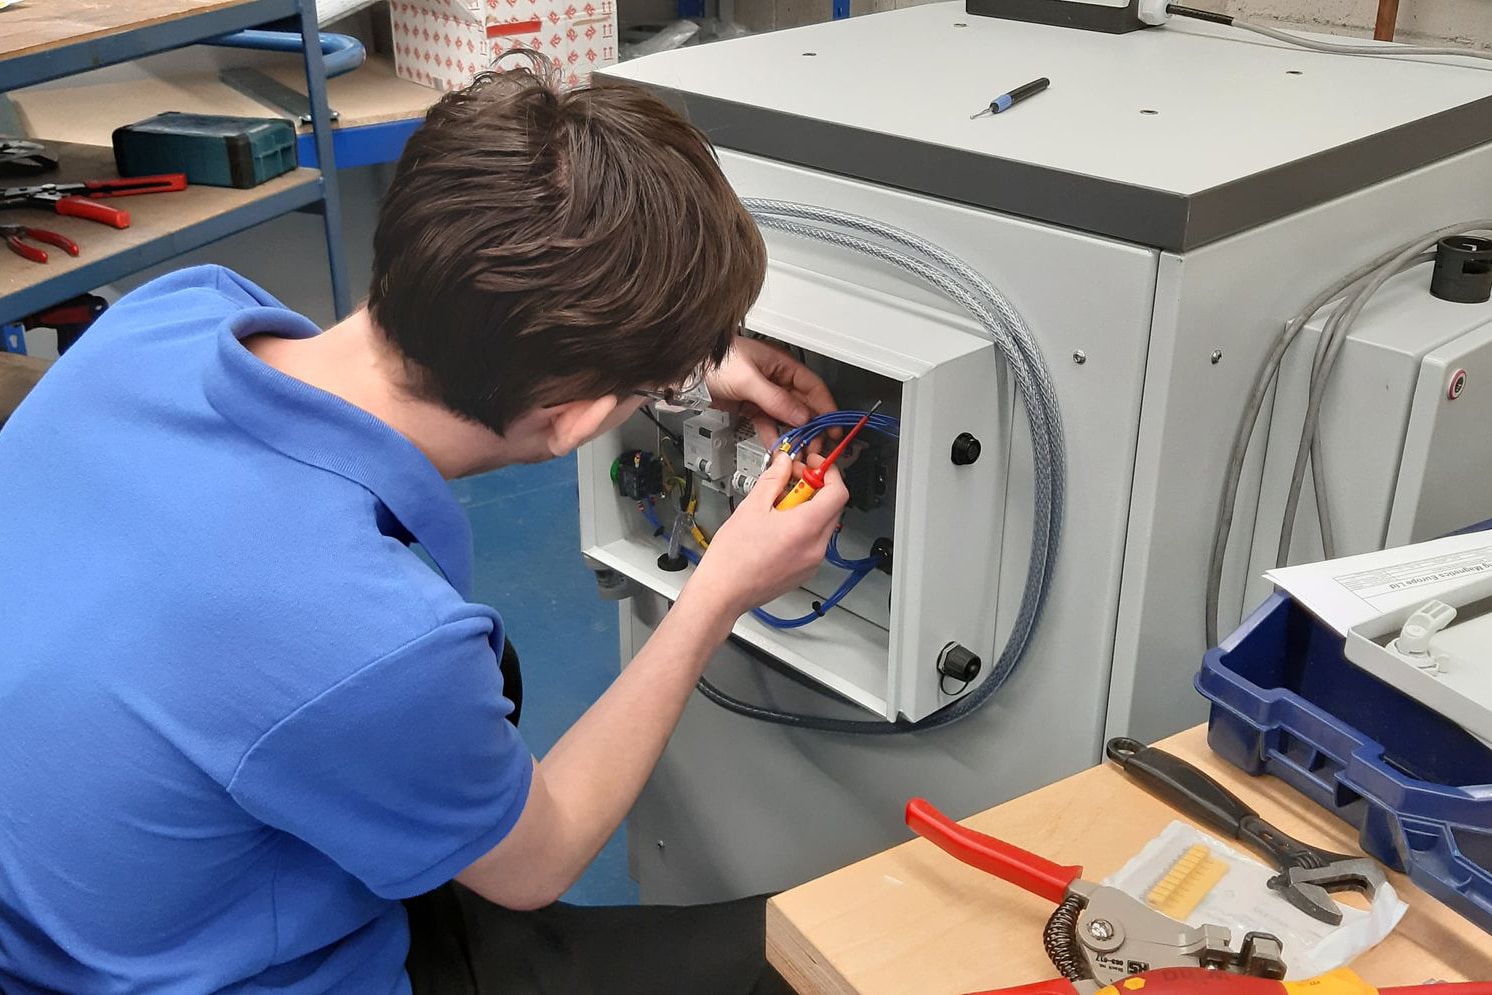 The importance of engineering apprenticeships